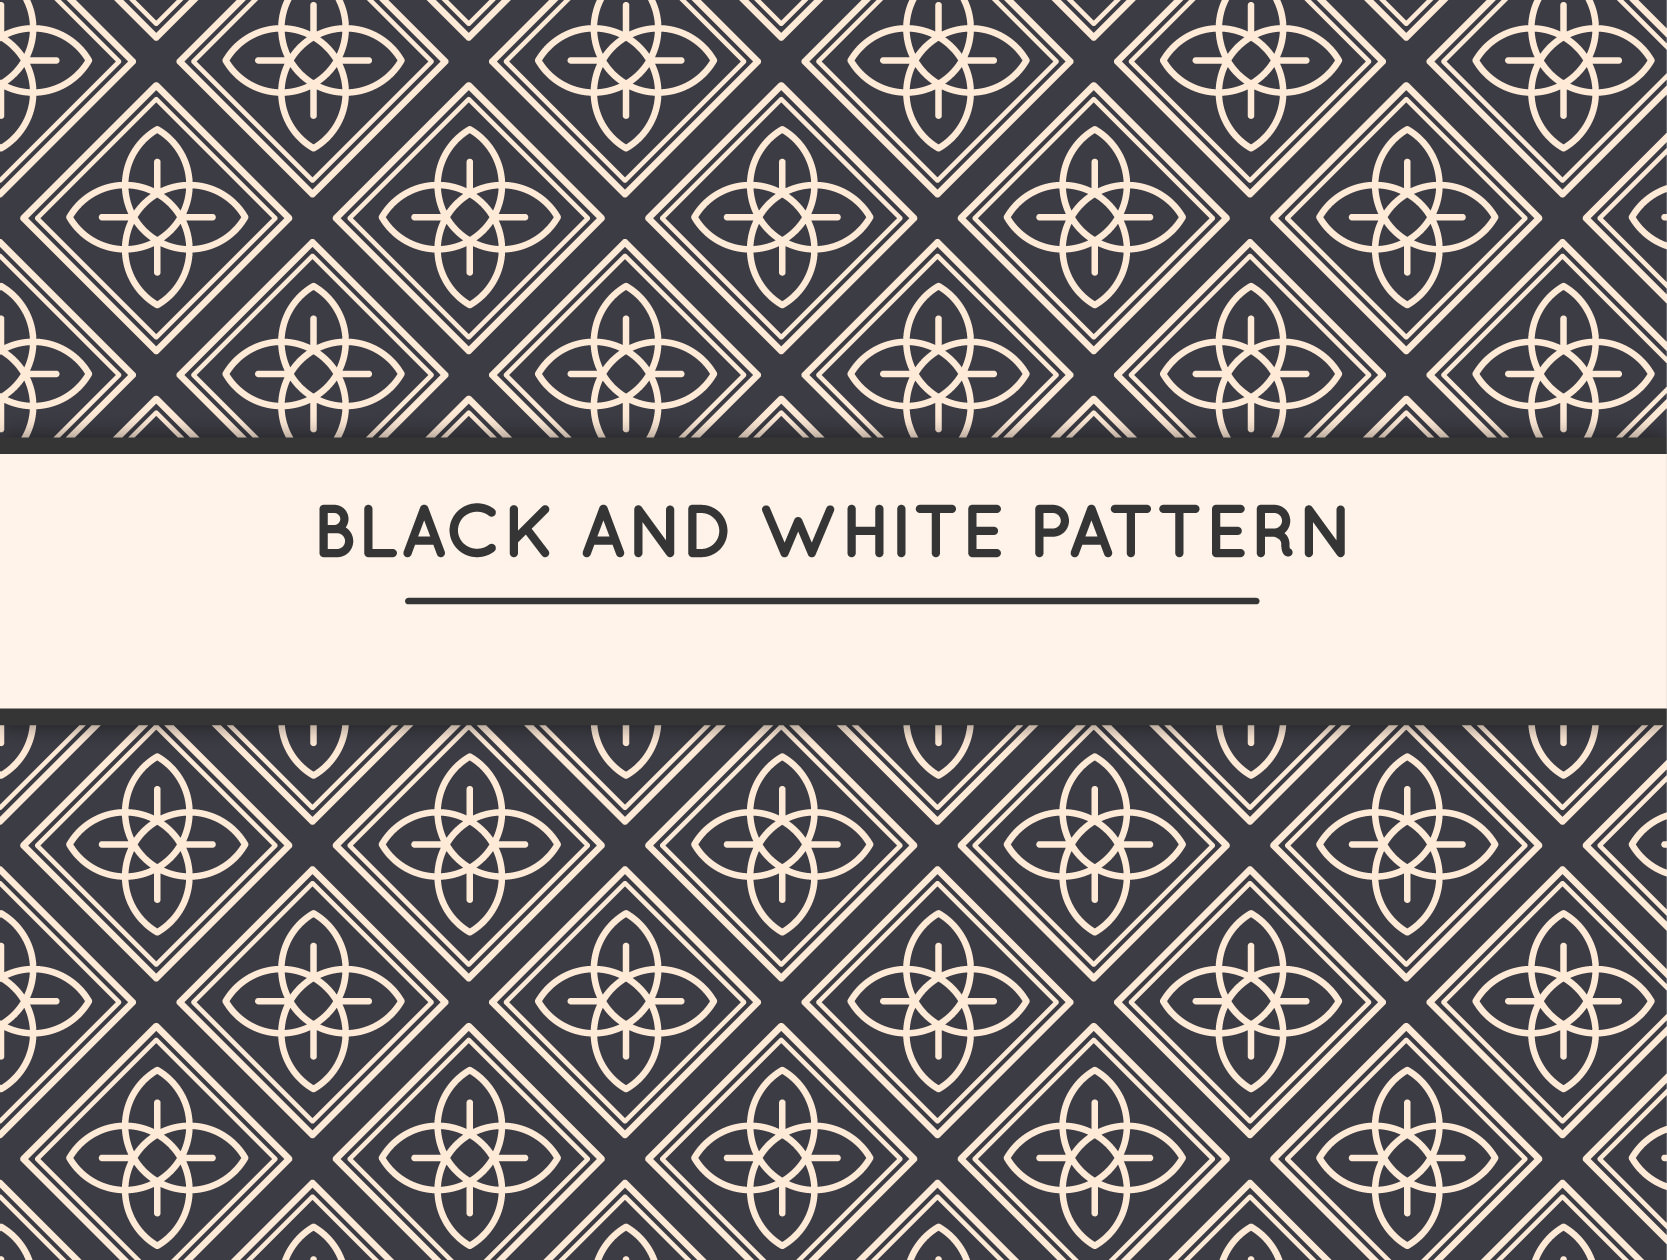 Black and White Floral Patterns